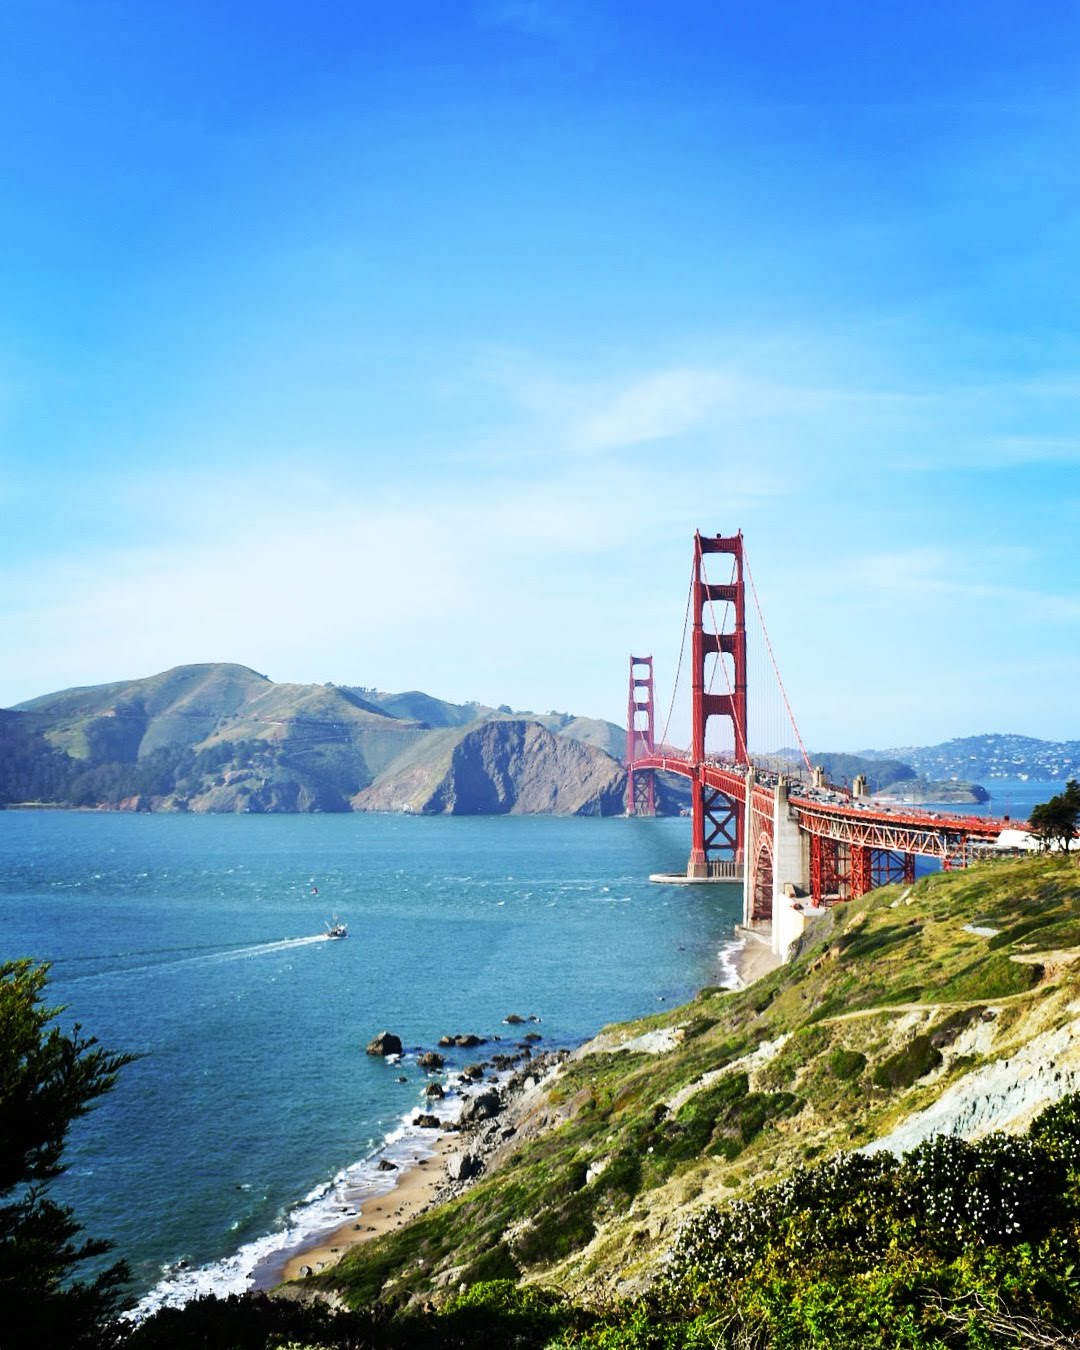 After taking a plane, I arrived in San Francisco.  The Golden Gate Bridge was Only the Start of What Took Place. 